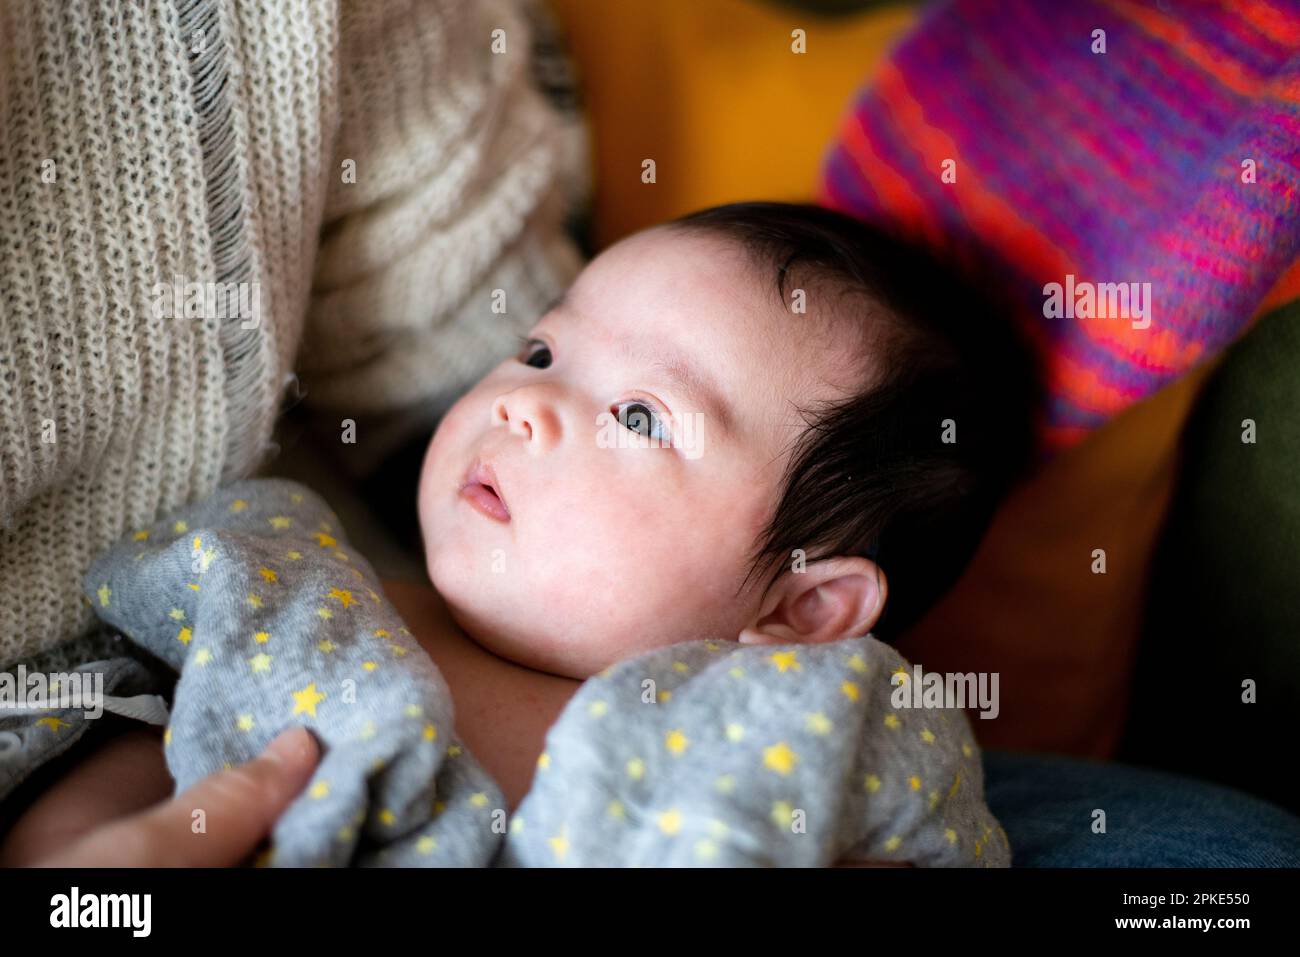 Baby staring at mother Stock Photo